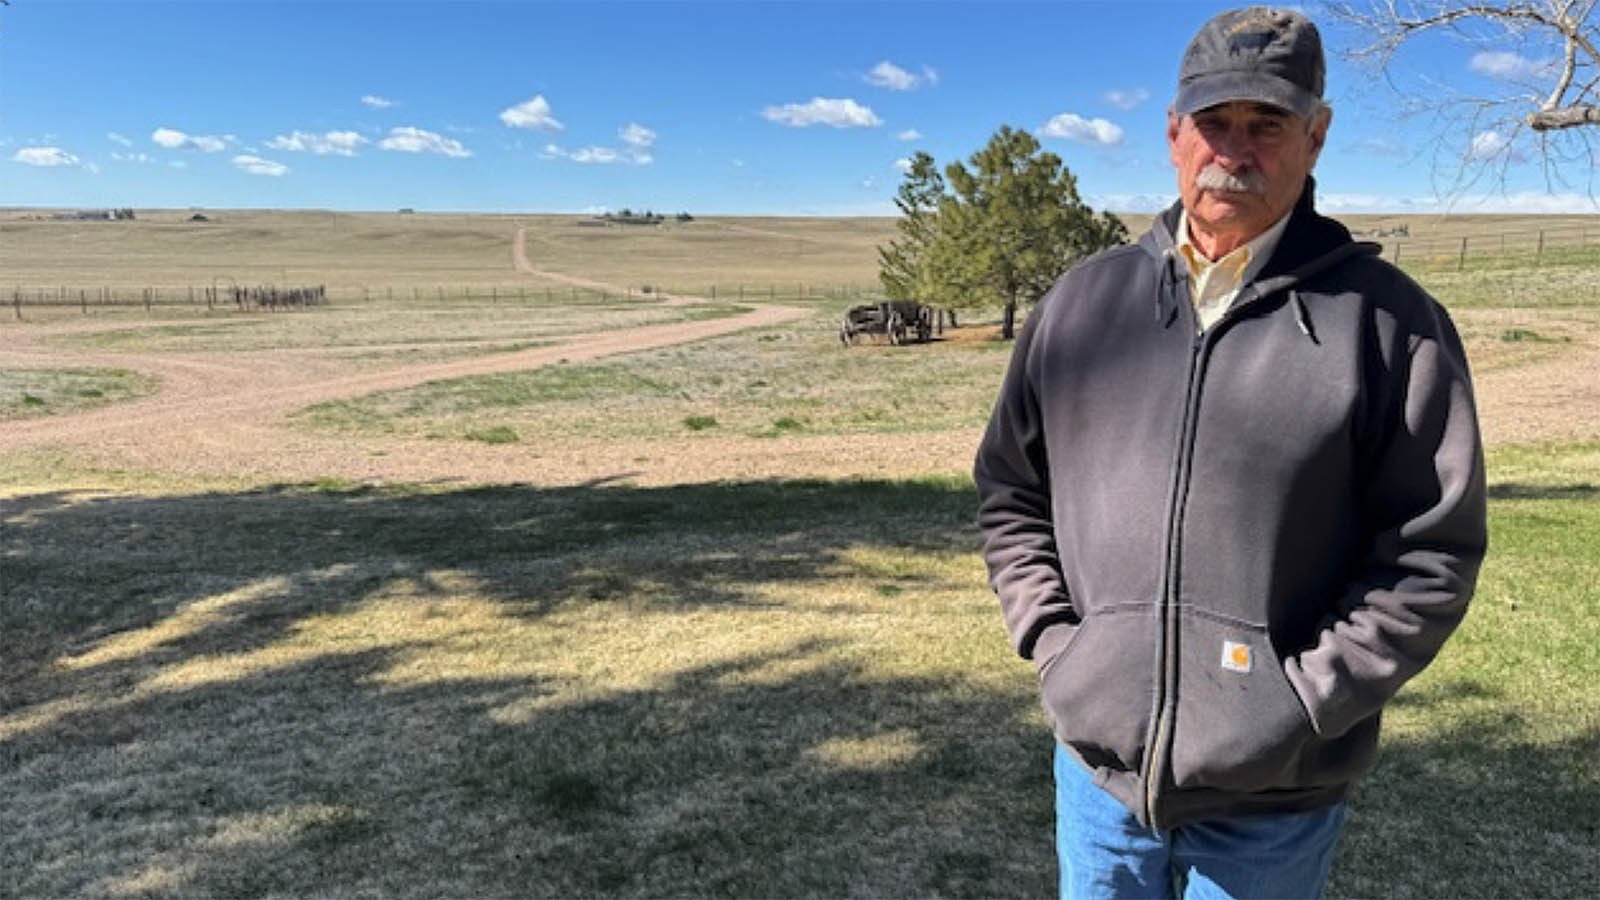 Cattle cancher Ed Prosser’s farmland frontage extends to Chalk Bluff Road in south Cheyenne, where he’s expecting hundreds of cars to travel on their way to work to build a new $1.2 billion solar farm proposed by Canada’s Enbridge Inc.